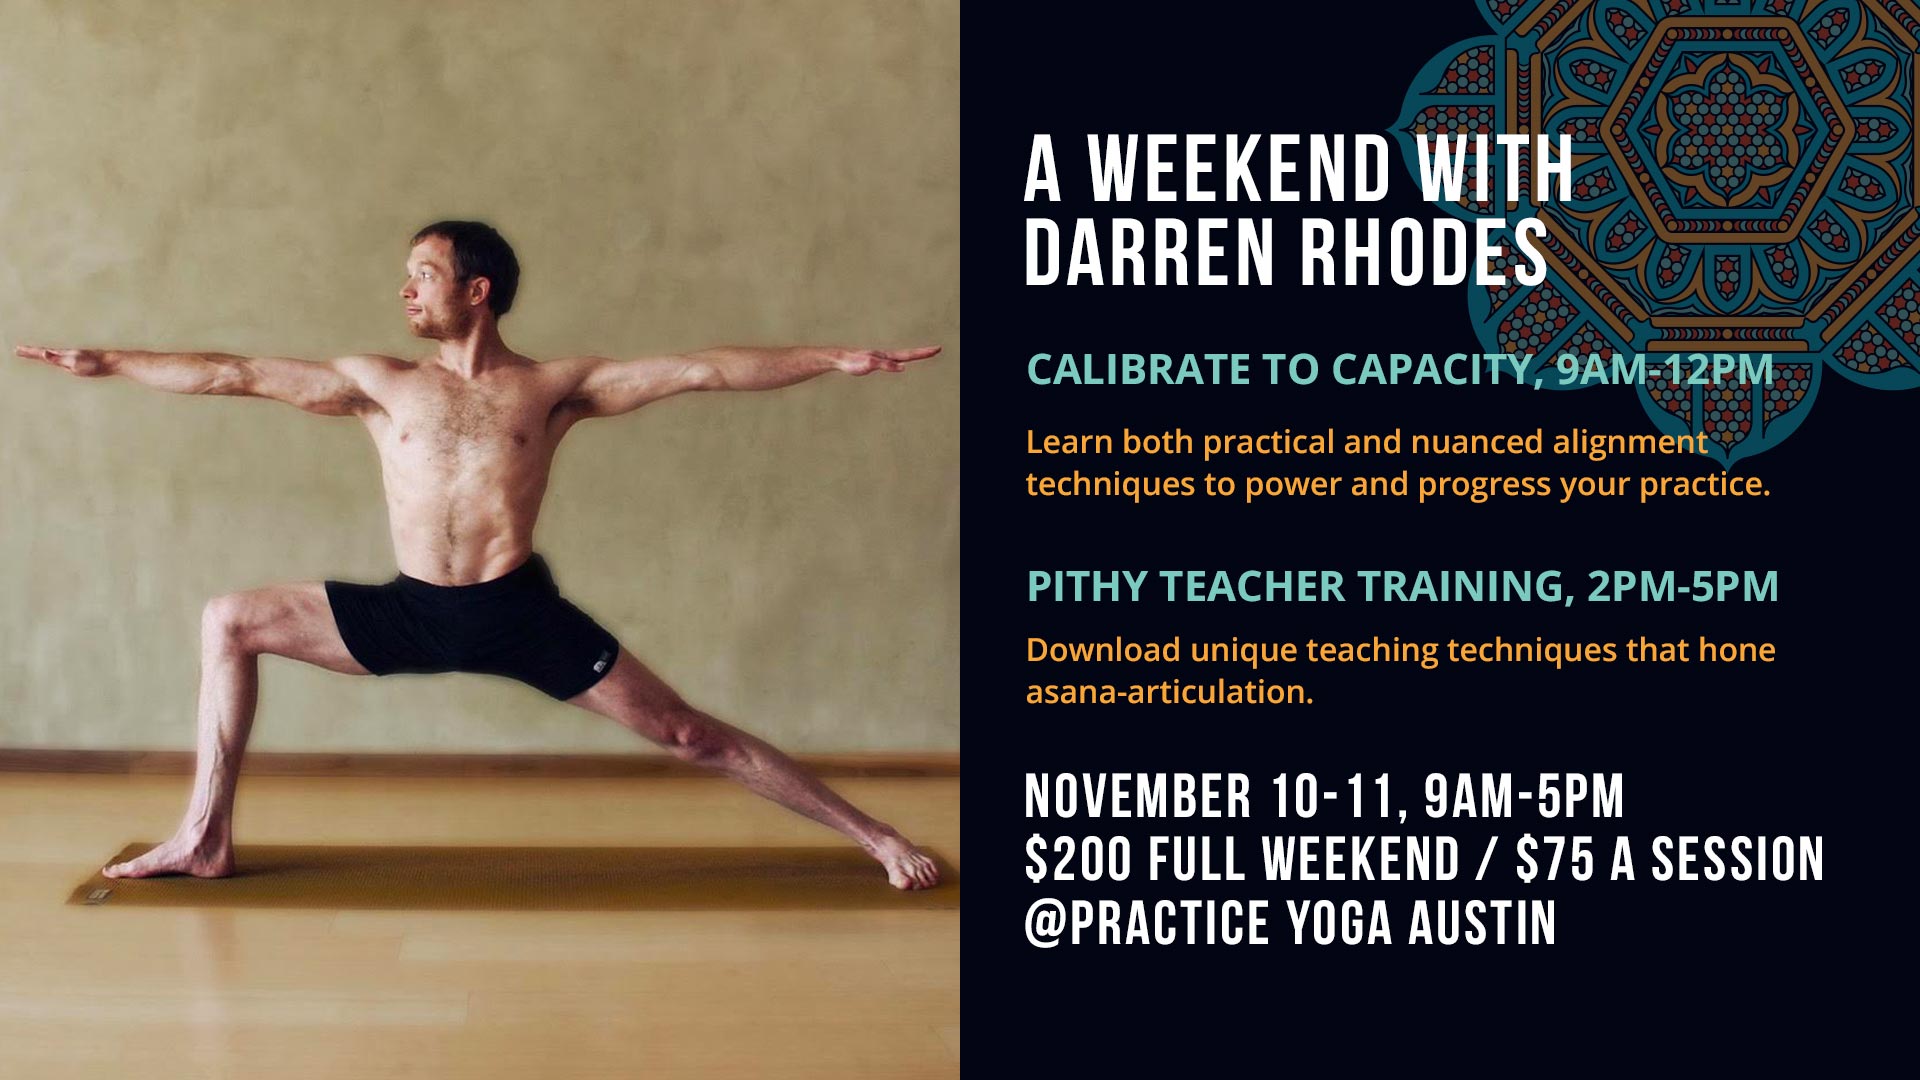 A Weekend with Darren Rhodes at Practice Yoga Austin